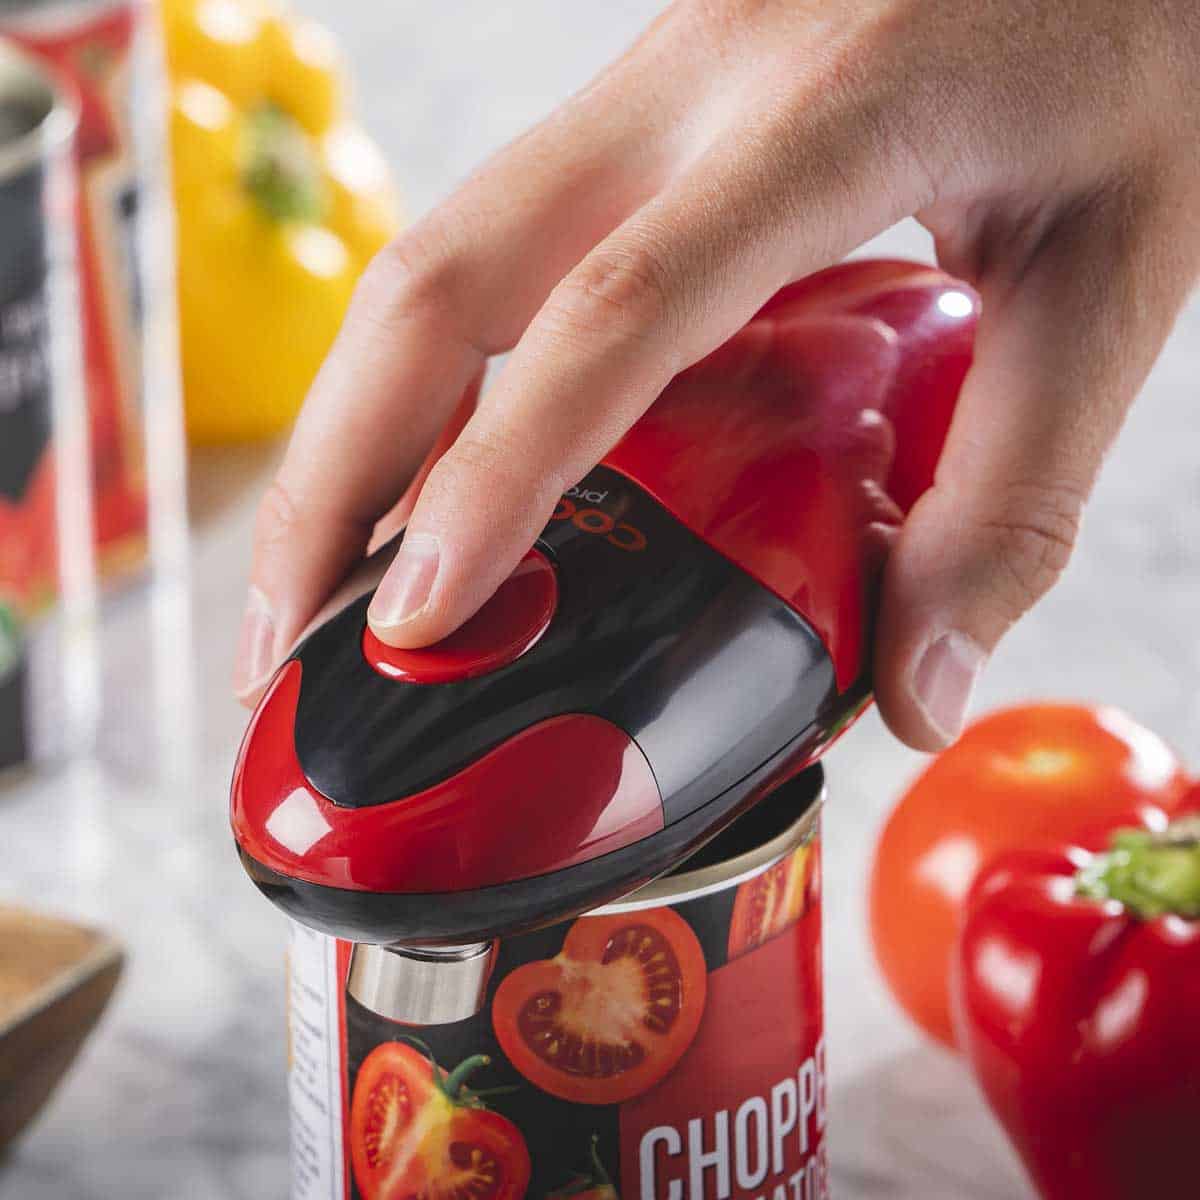 https://www.cooksprofessional.co.uk/wp-content/uploads/2022/09/Automatic-Can-Opener-Red-LS-3-2000px.jpg